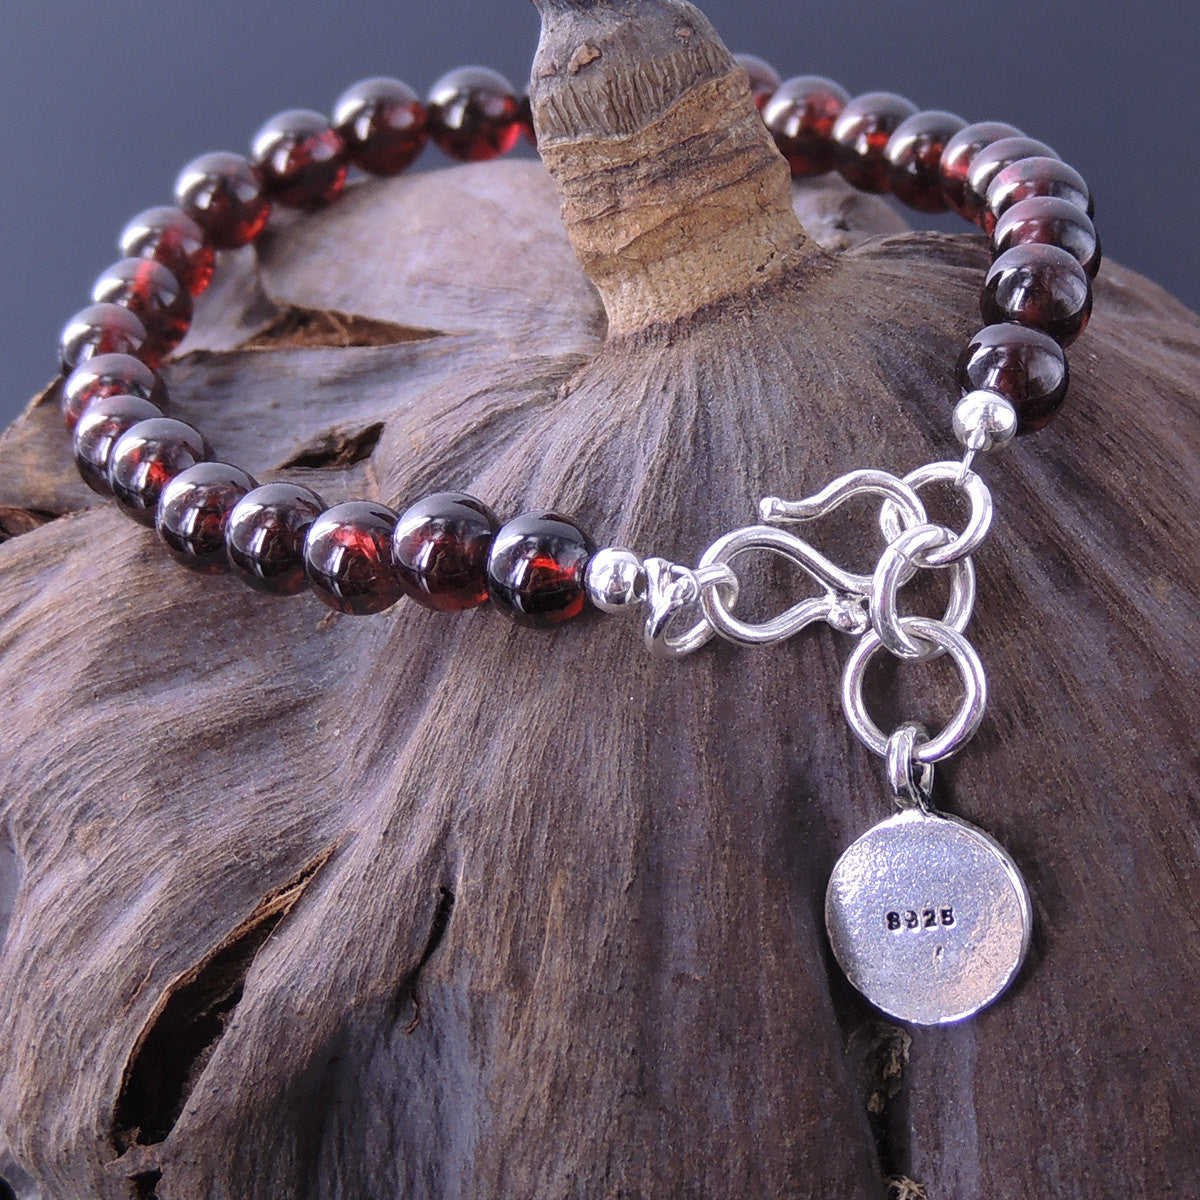 5.5mm Grade AAA Garnet Healing Gemstone Bracelet with S925 Sterling Silver Engraved Lotus Coin Pendant, Spacer Beads & S-Hook Clasp - Handmade by Gem & Silver BR008